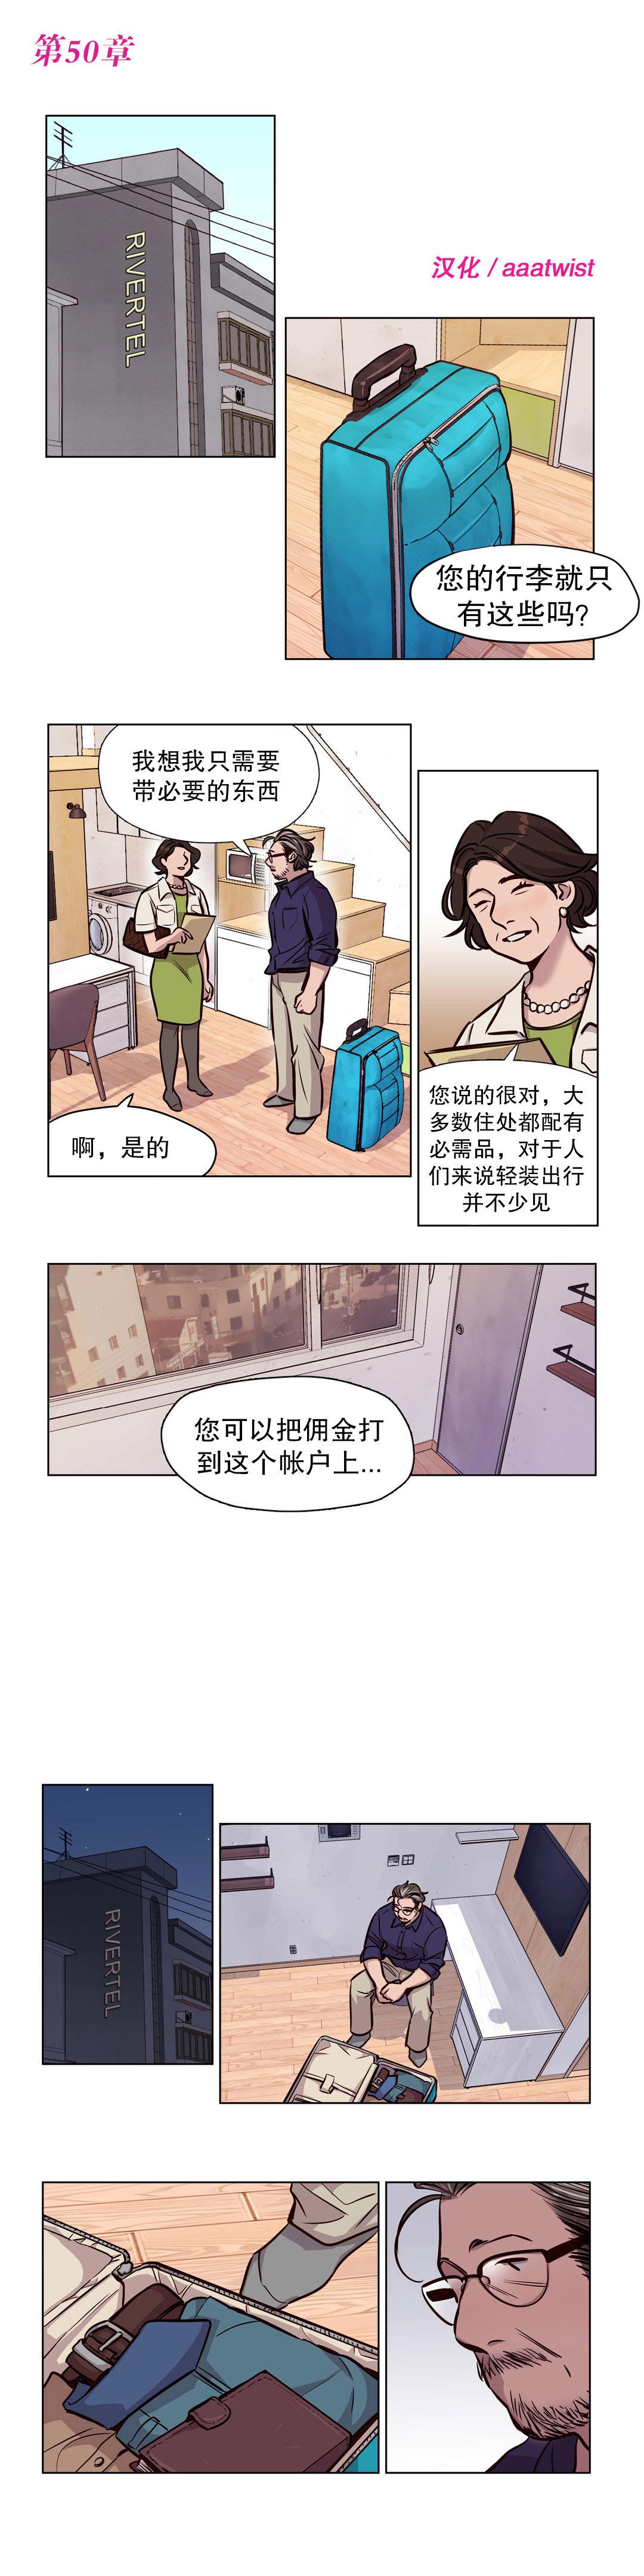 [Ramjak] 赎罪营(Atonement Camp) Ch.50-52 (Chinese) 1